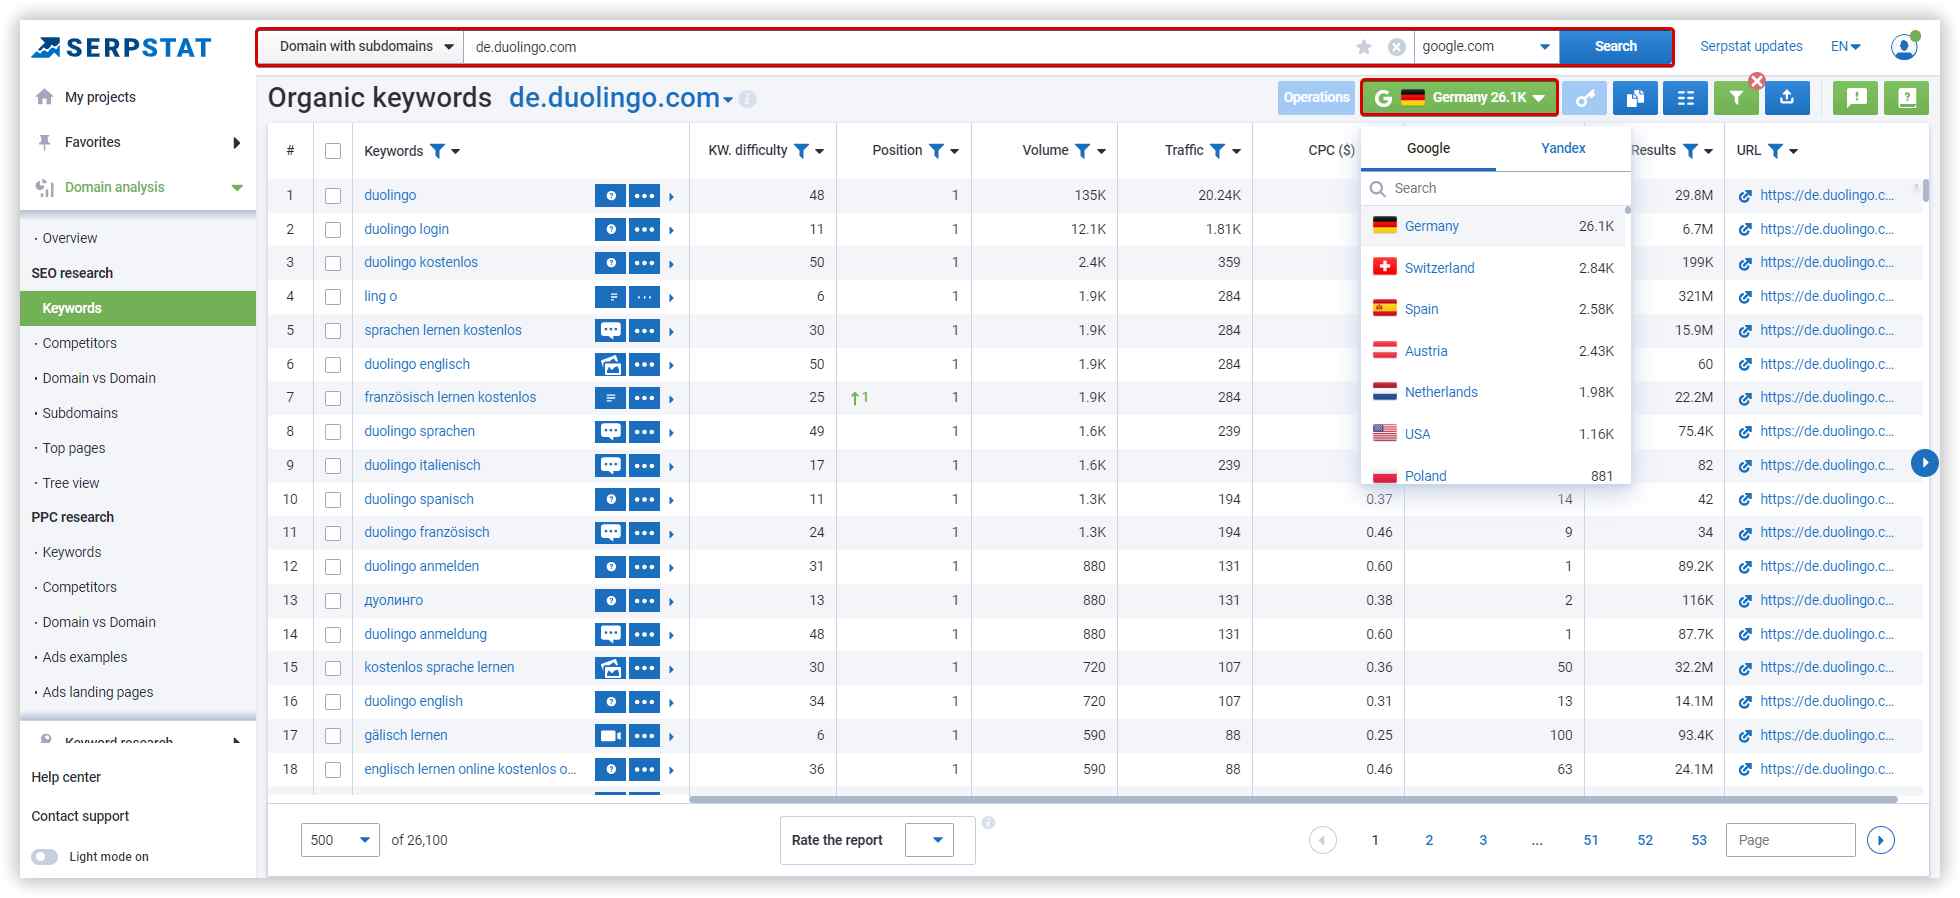 Search for keywords of competitors on the Google Germany database in Serpstat